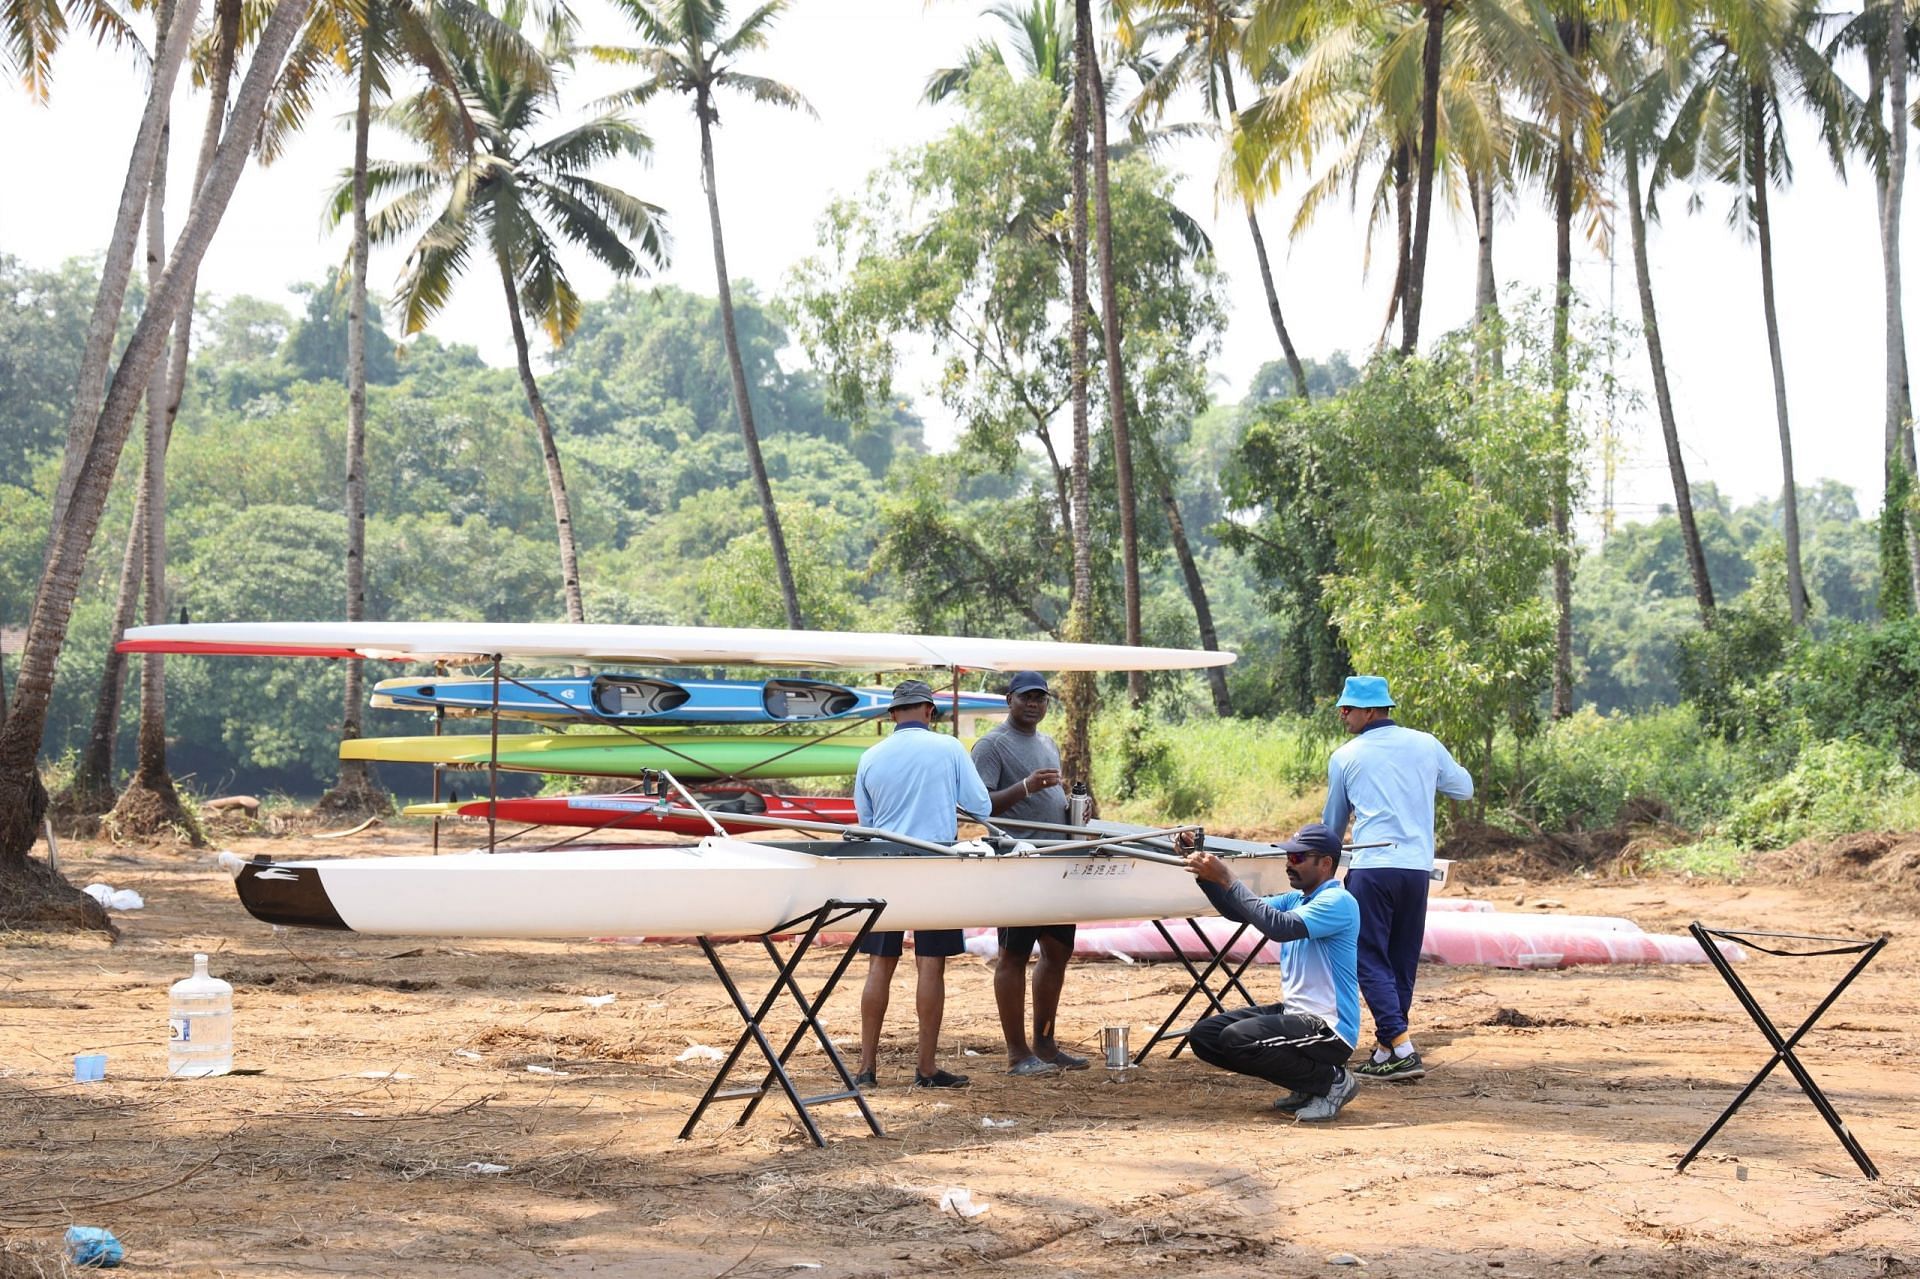 When farmers come forward to help Goa government get ready for rowing competition